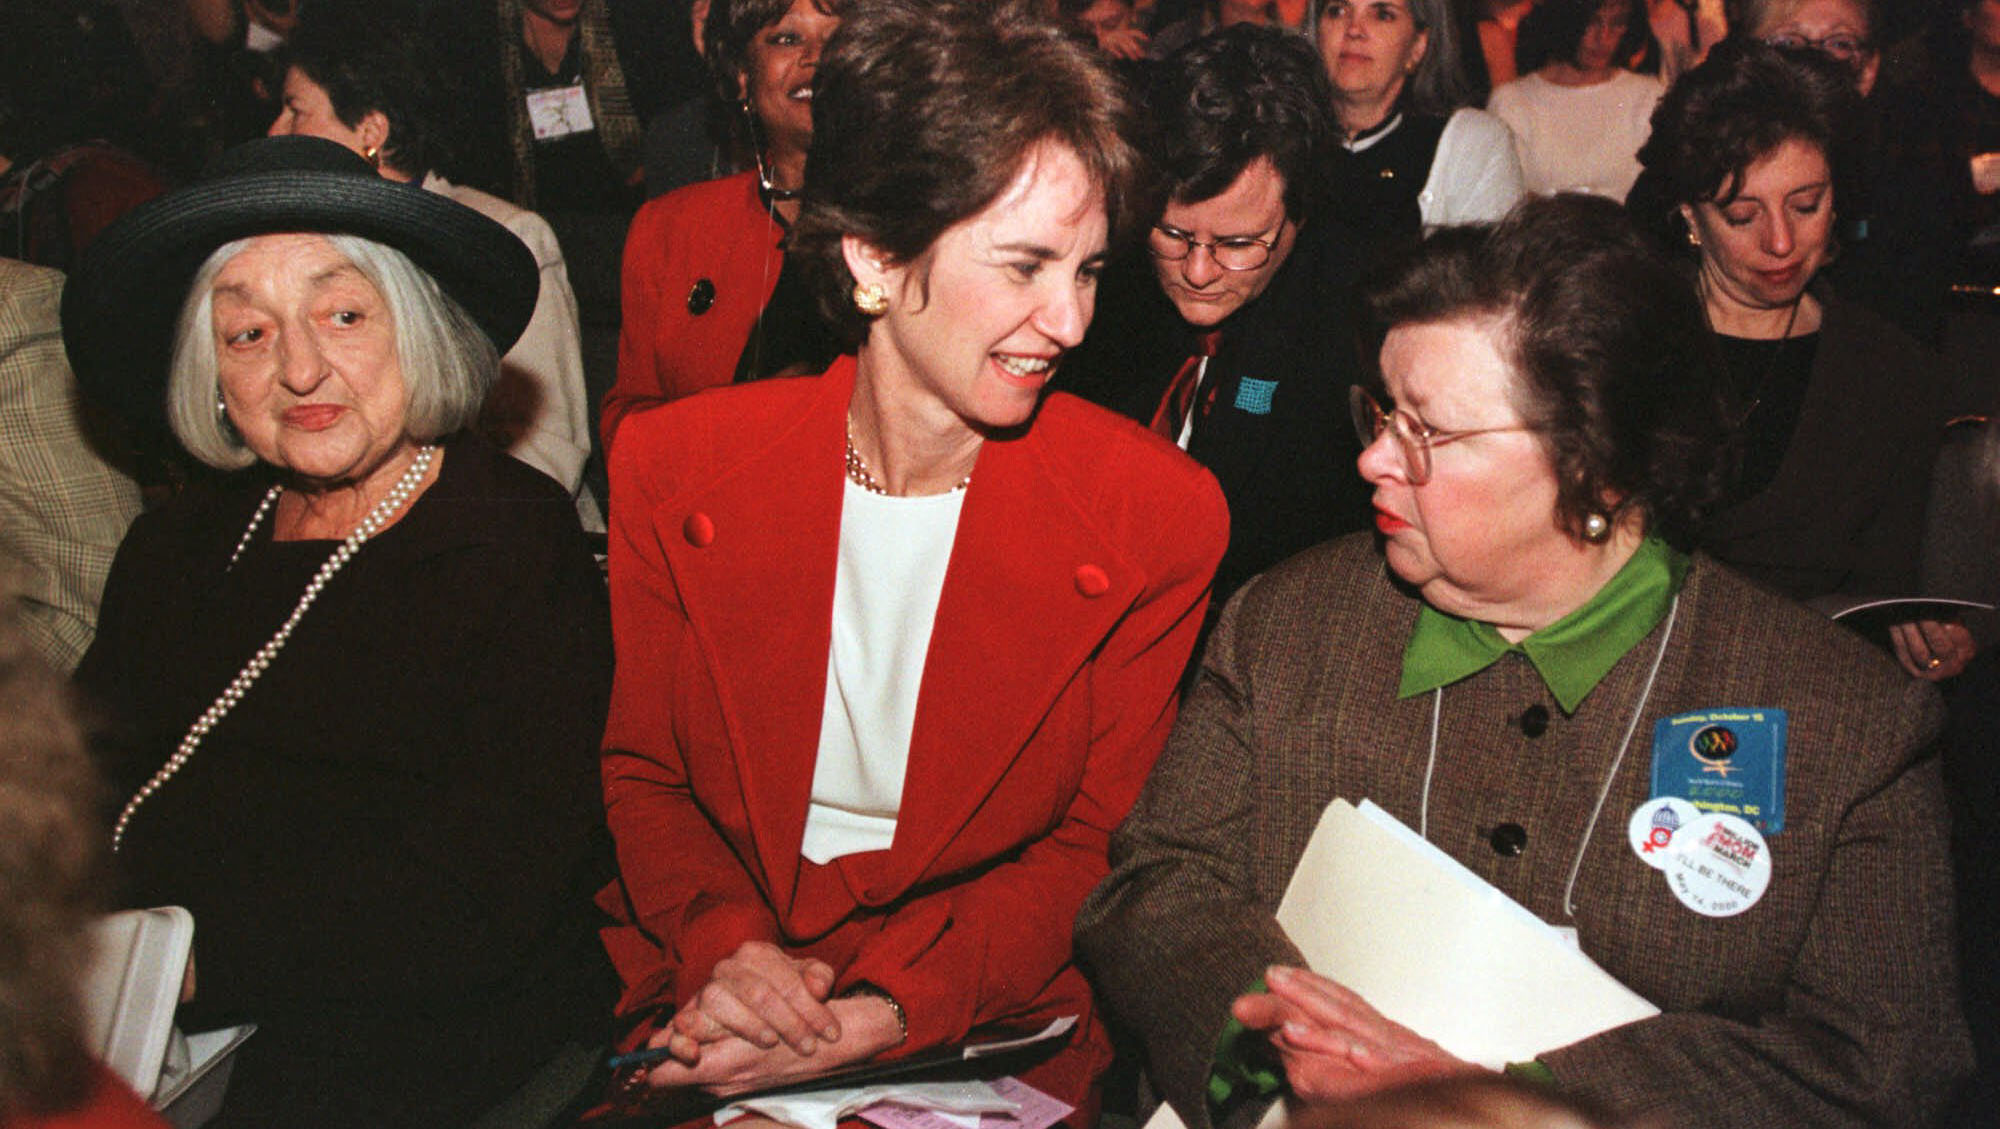 Feminist author Betty Friedan, left, is seen with former Lt. Gov. Kathleen Kennedy Townsend and Sen. Barbara Mikulski (D-MD) at the Feminist Expo 2000 in Baltimore. (AP/Gail Burton)